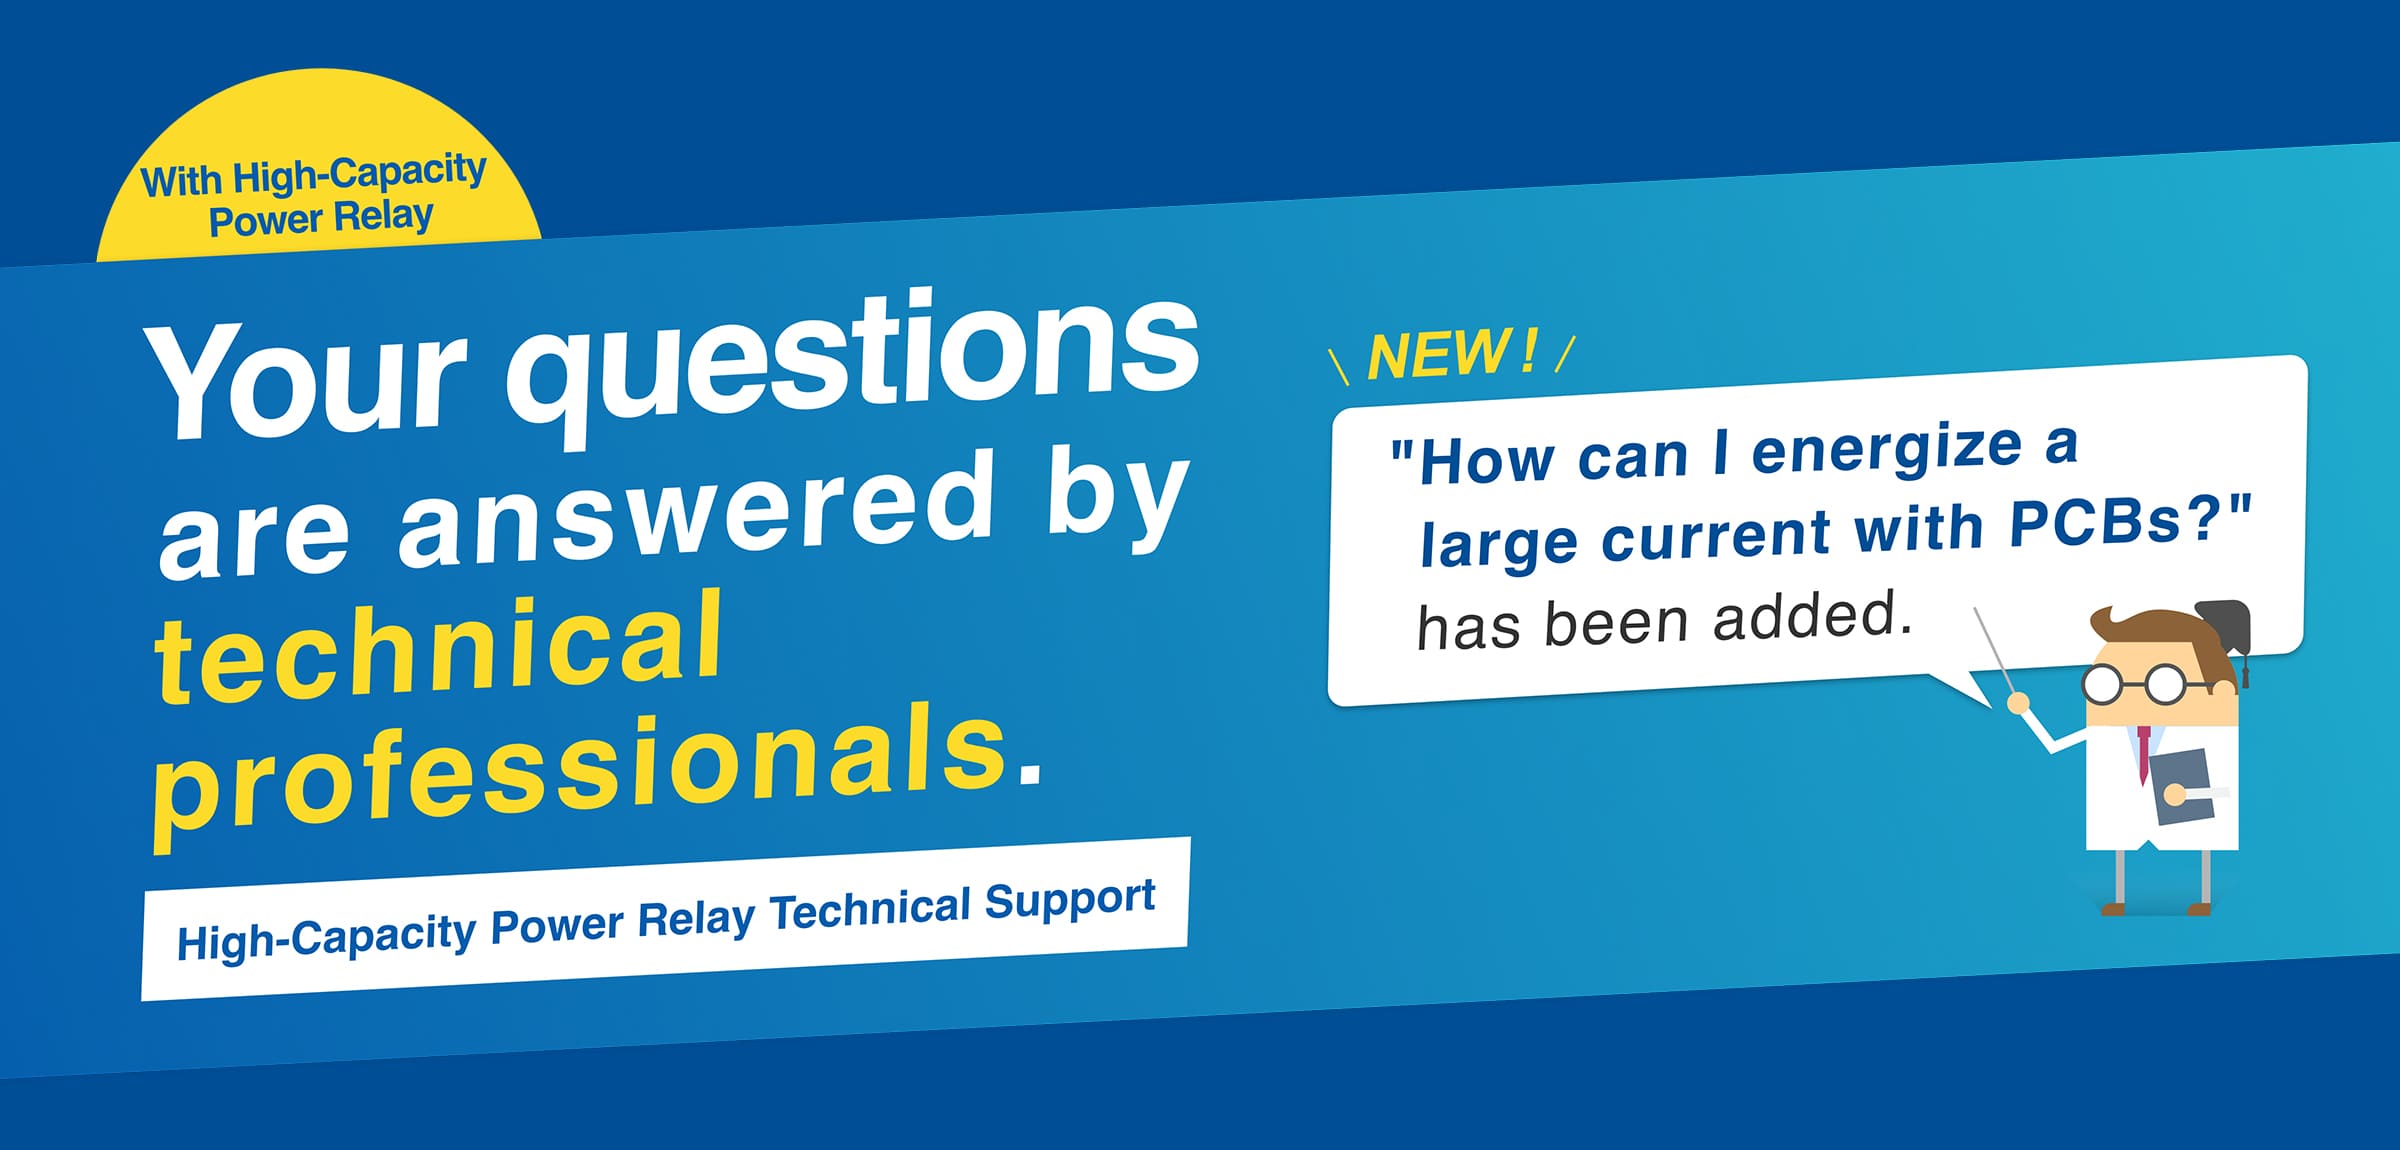 With High-Capacity Power Relay Your questions are answered by technical professionals. High-Capacity Power Relay Technical Support (NEW!)"How can I energize a large current with PCBs?" has been added.